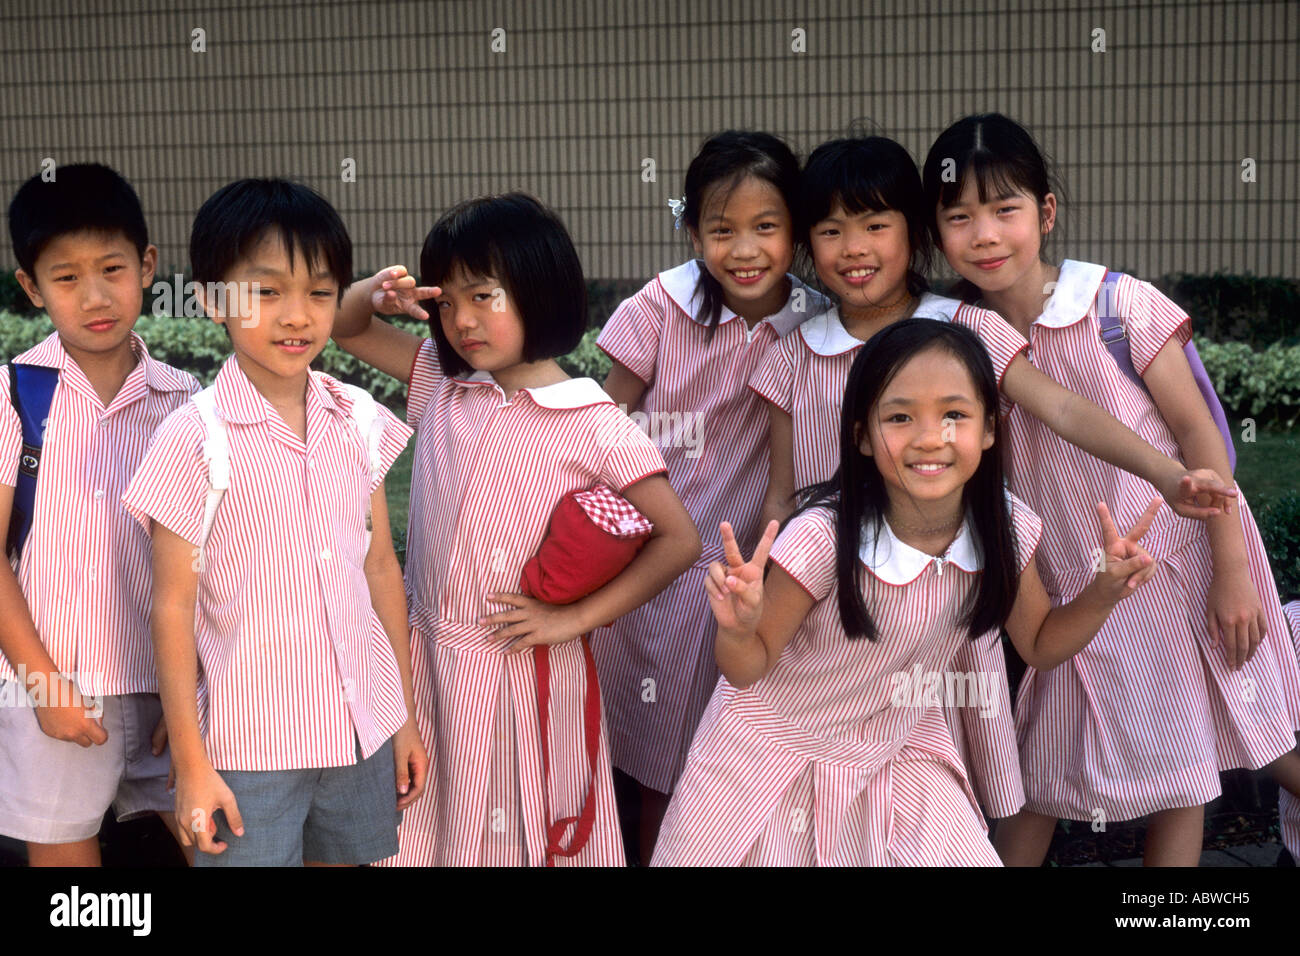 School children age 7 and 8 in Uniform smiling in Hong Kong Island ...